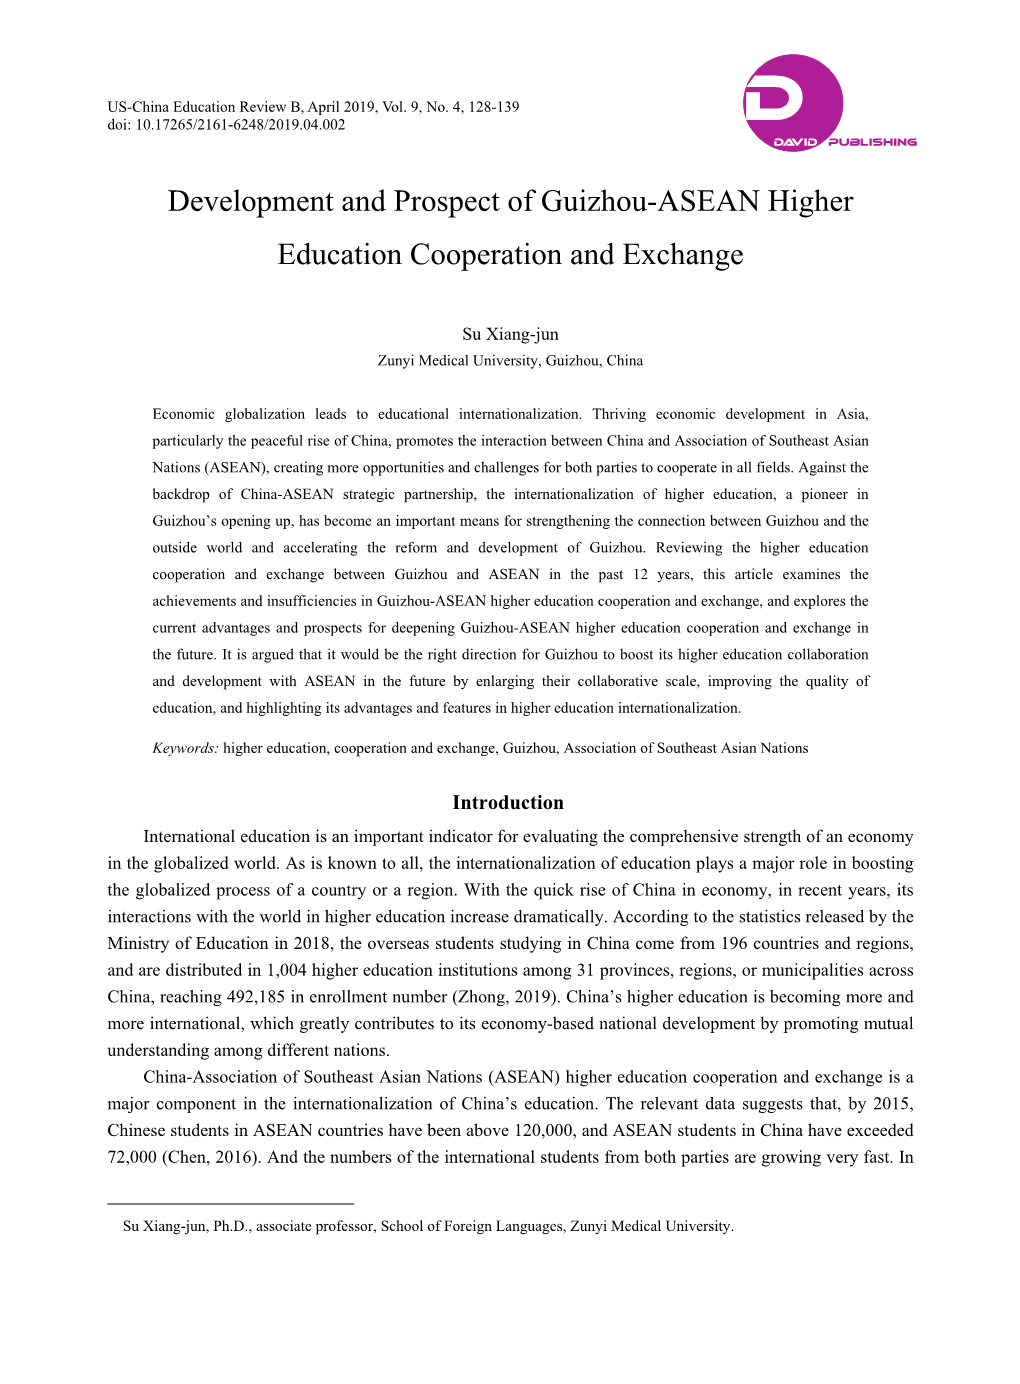 Development and Prospect of Guizhou-ASEAN Higher Education Cooperation and Exchange